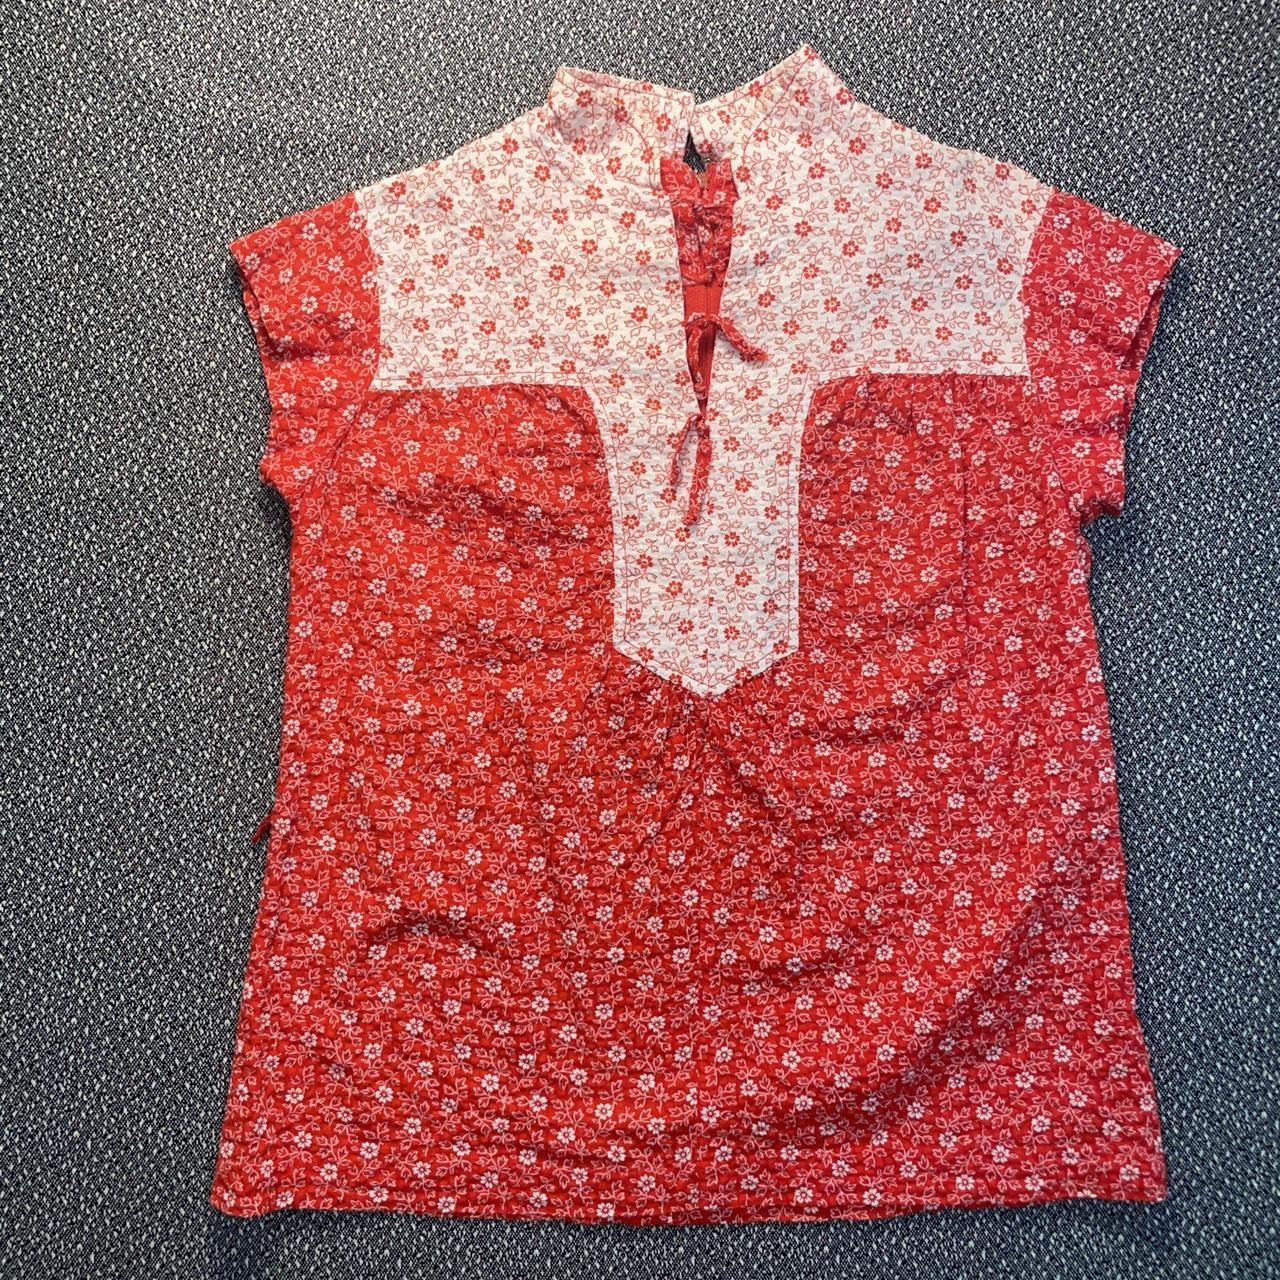 JCPenney Women's Red and White Blouse | Depop